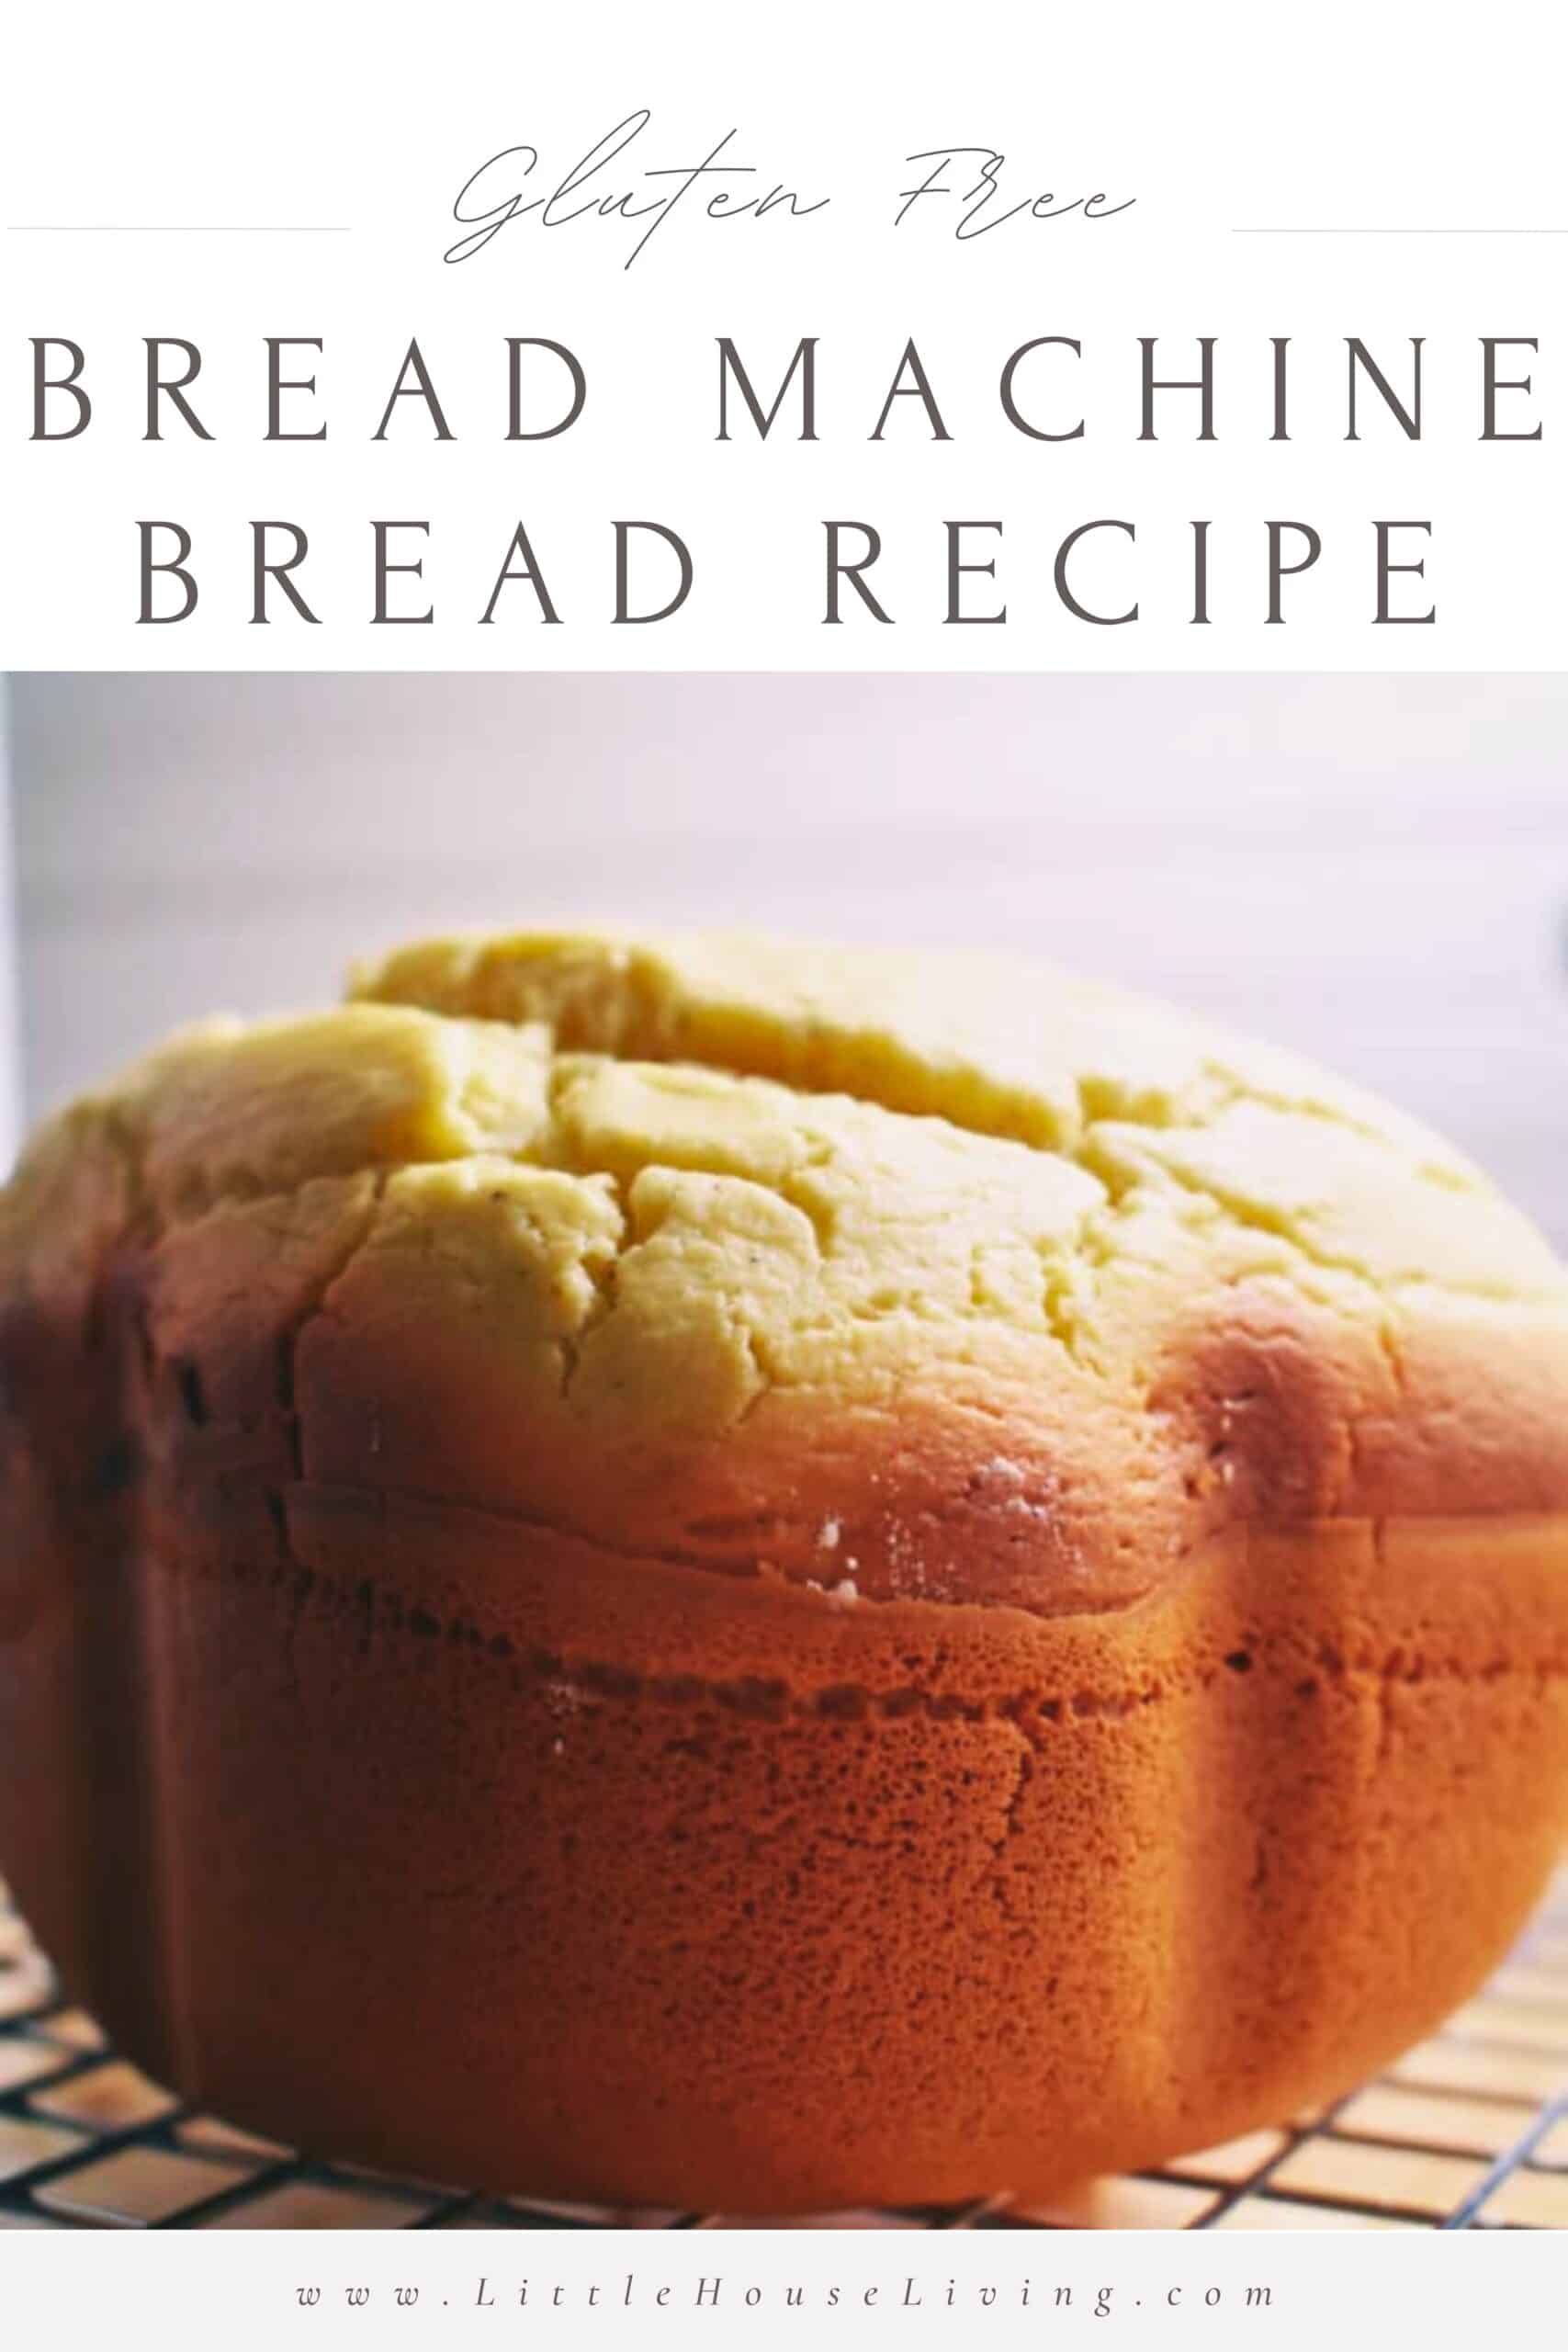 Are you looking for the perfect homemade gluten-free bread to make for your family? This easy recipe will make you wonder why you ever bought it!